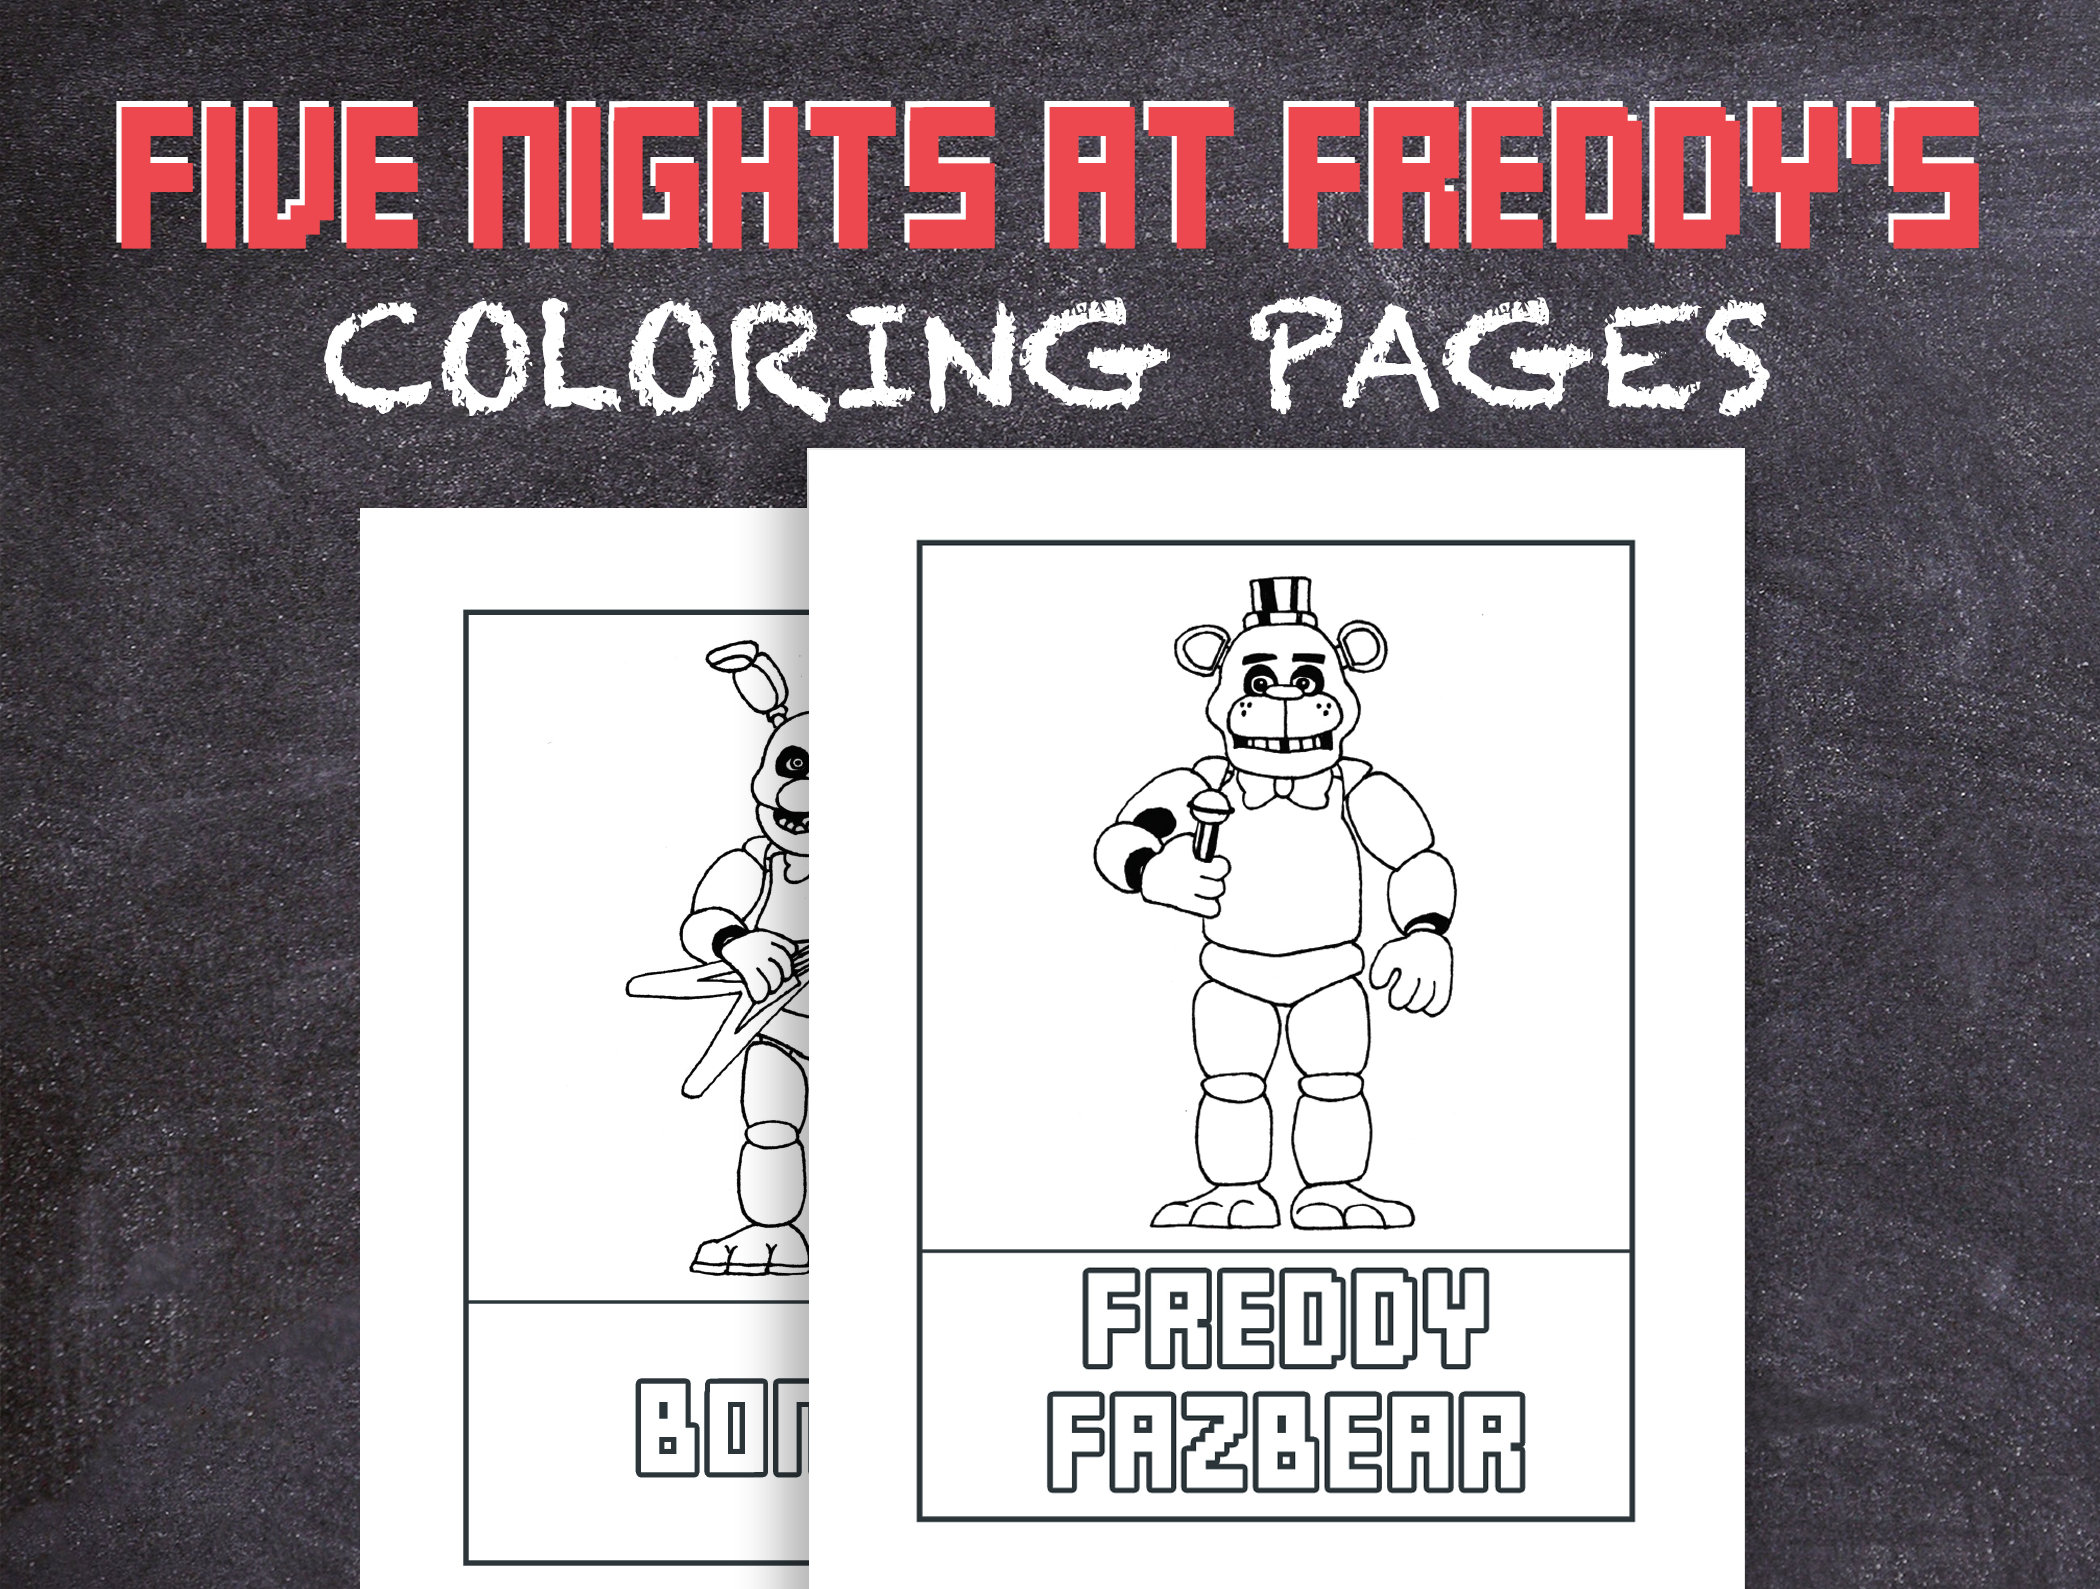 Five nights at freddys coloring pages fnaf colouring pages print at home pdf hand drawn instant download adult coloring book